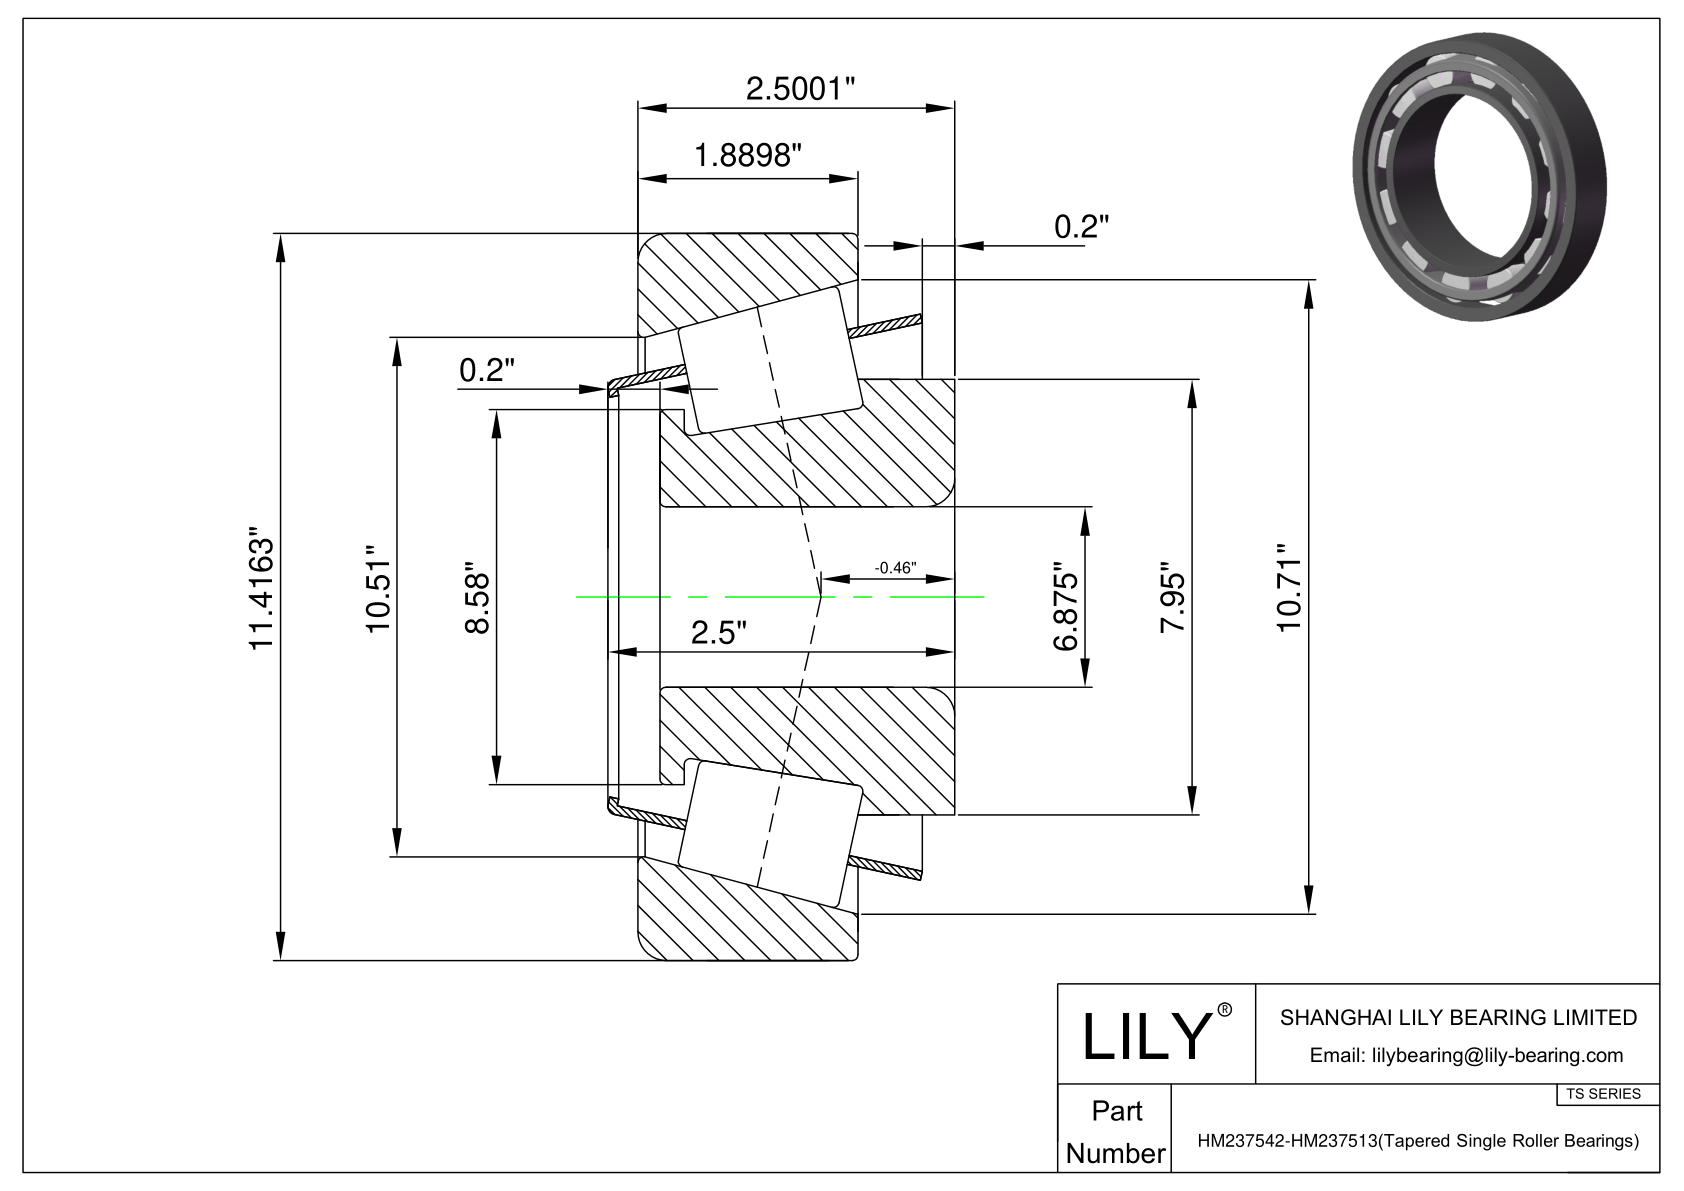 HM237542-HM237513 TS (Tapered Single Roller Bearings) (Imperial) cad drawing